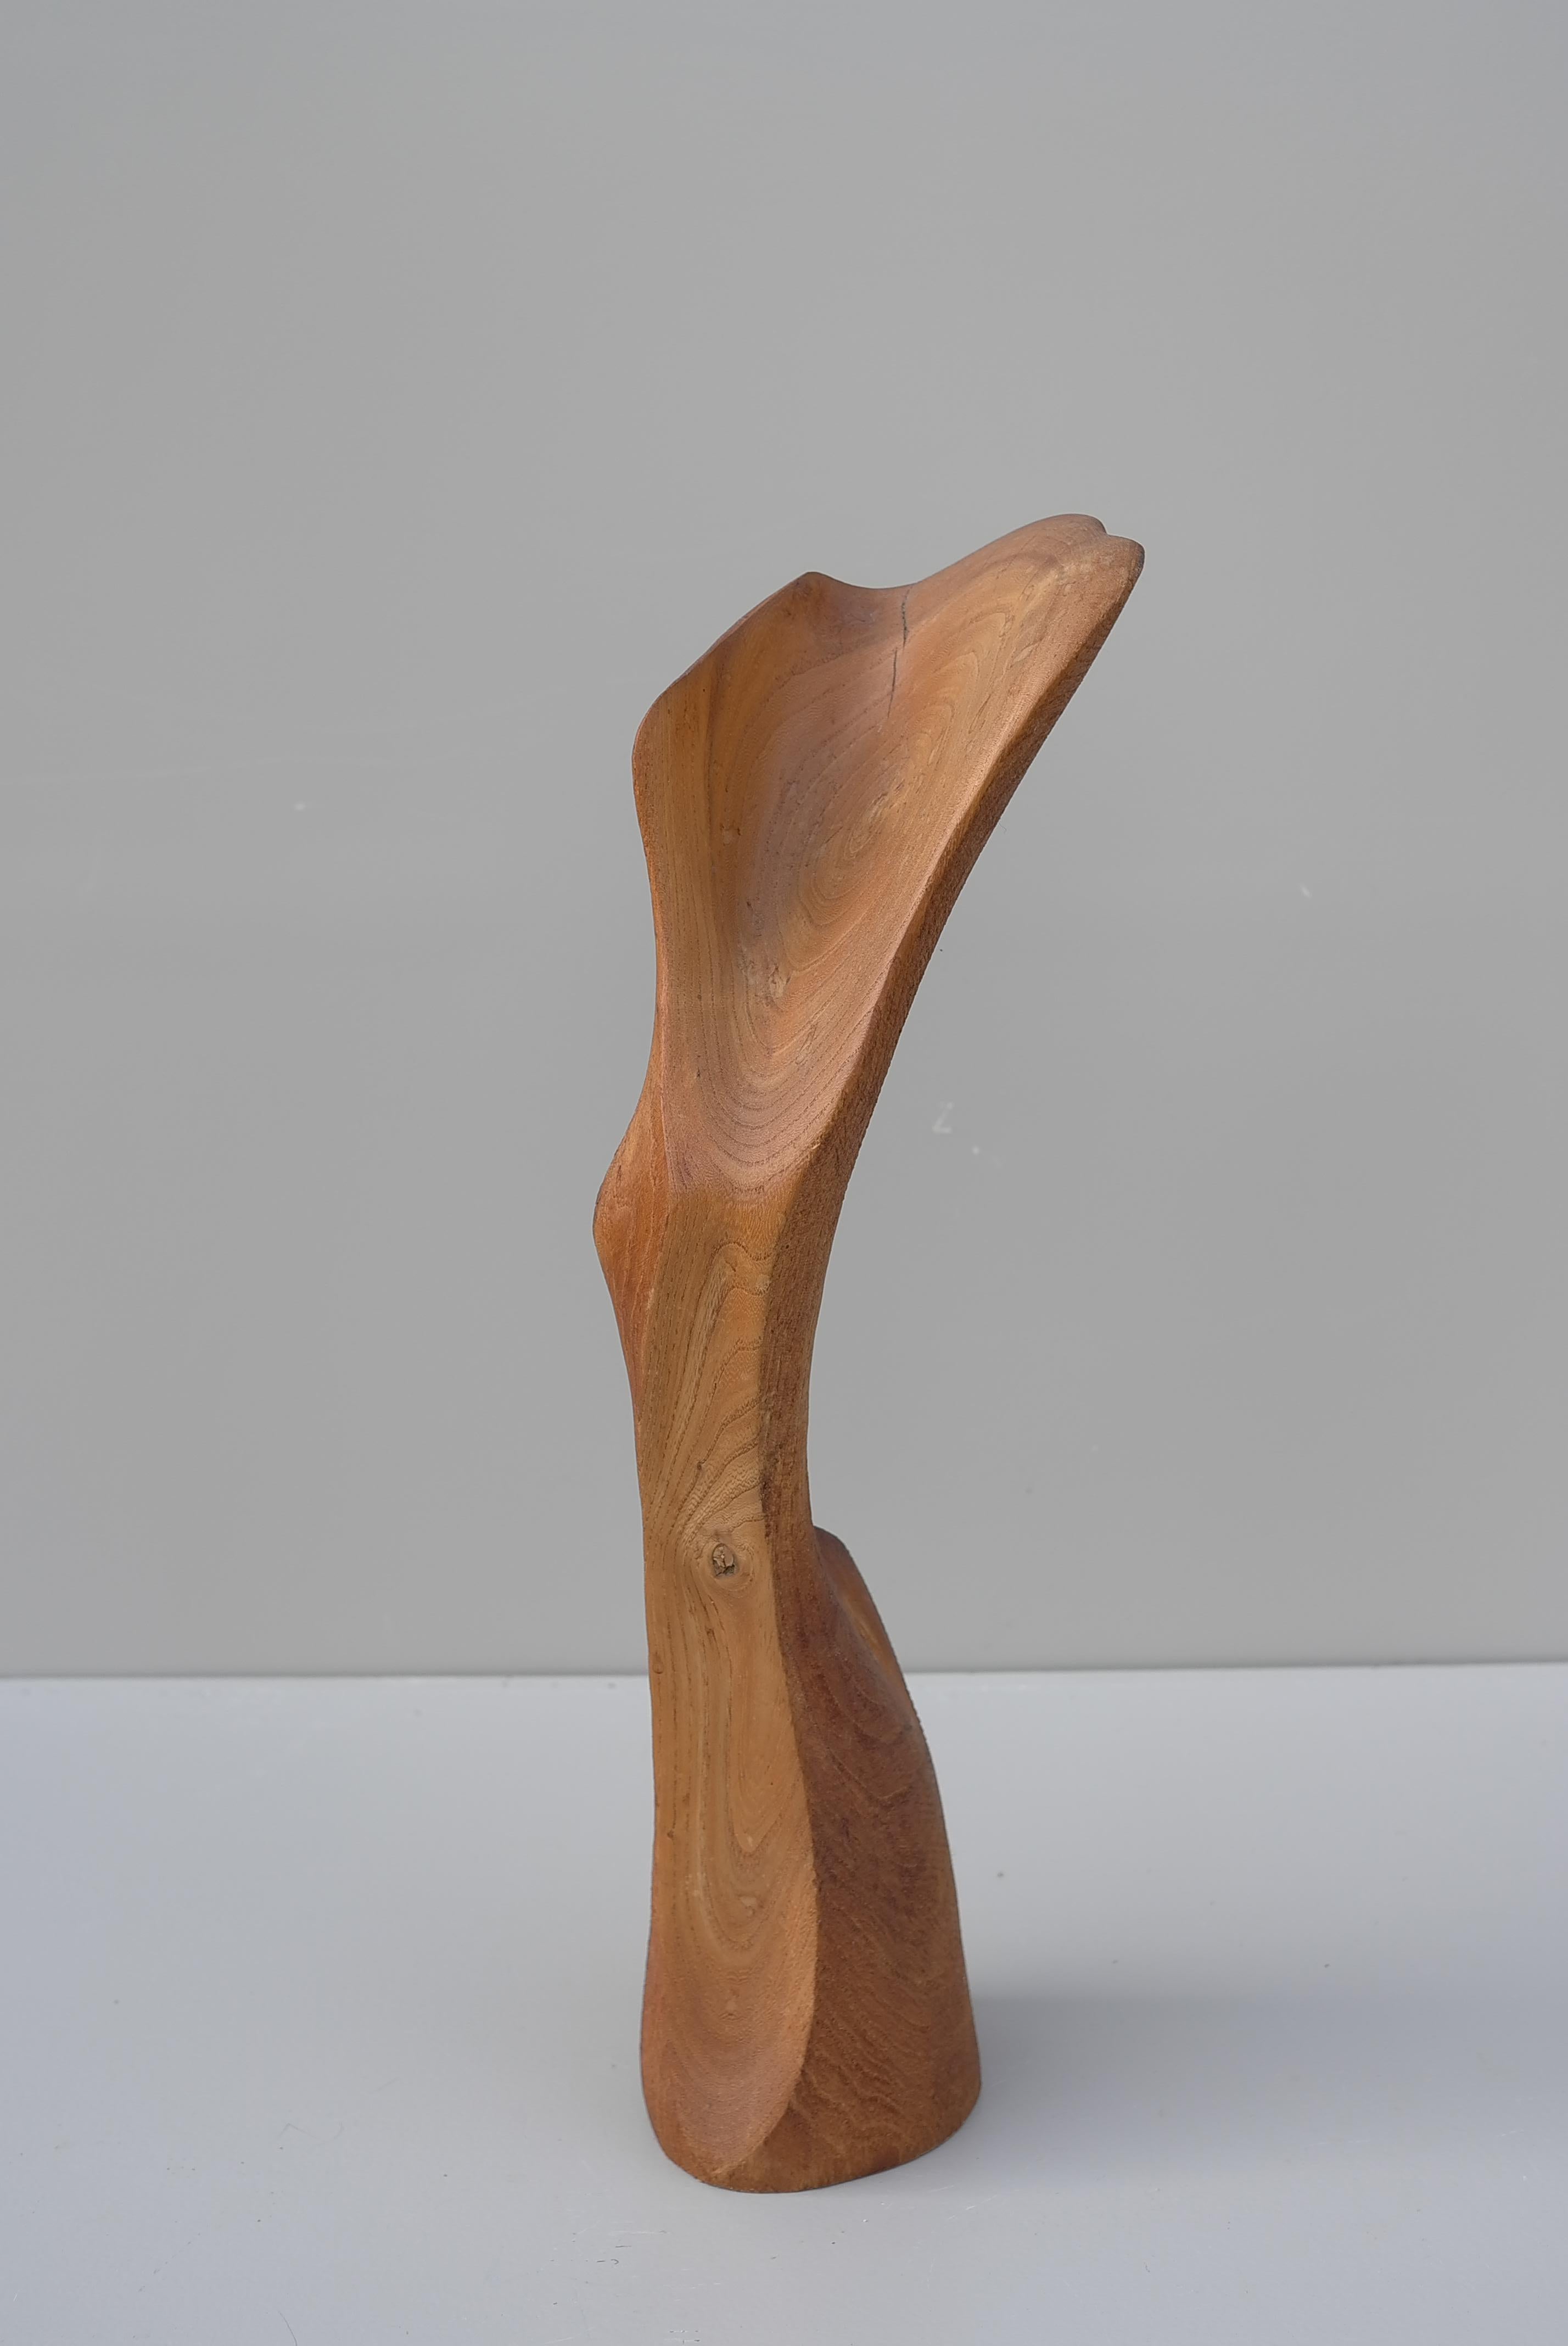  Abstract Mid-Century Modern Organic Wooden Sculpture, 1960's For Sale 8